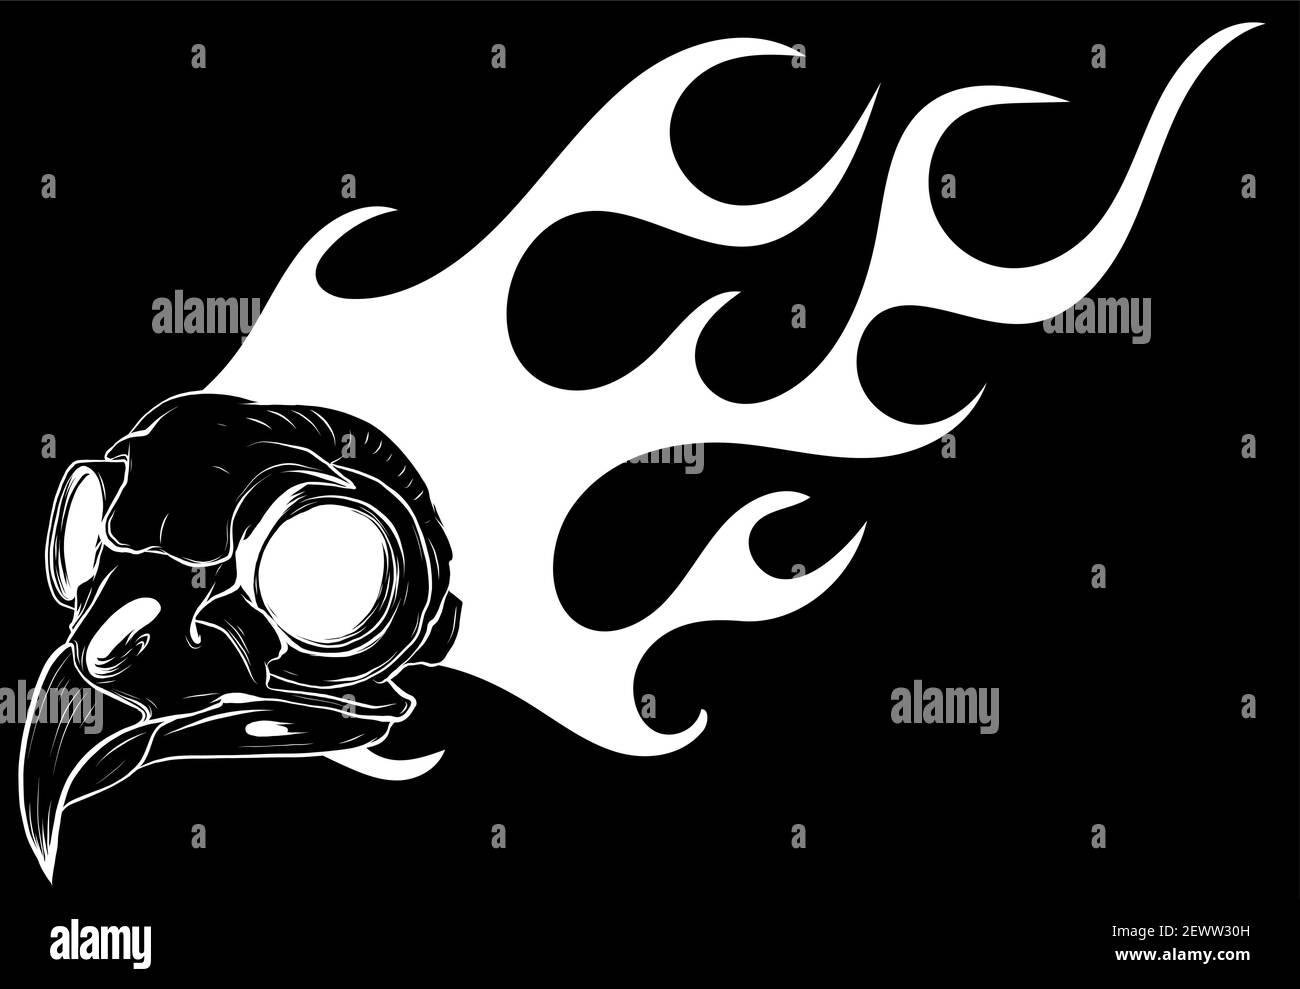 silhouette cartoon illustration of a bird skull with flames Stock Vector